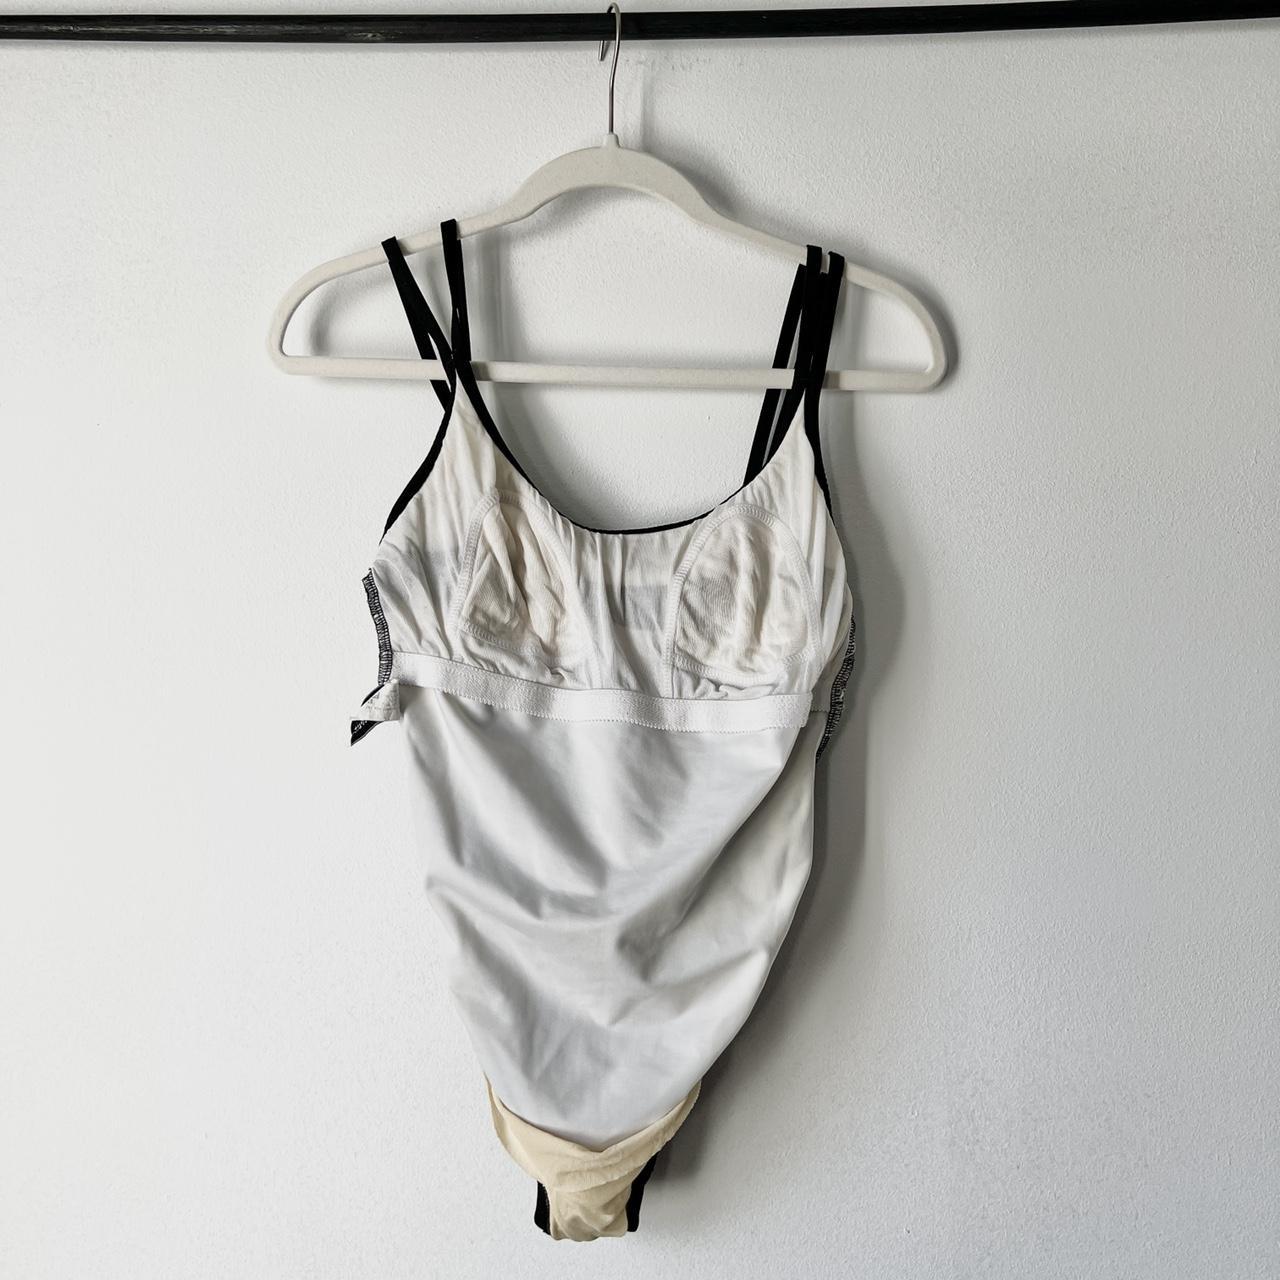 Product Image 3 - Vintage Miraclesuit one piece swimsuit

Marked